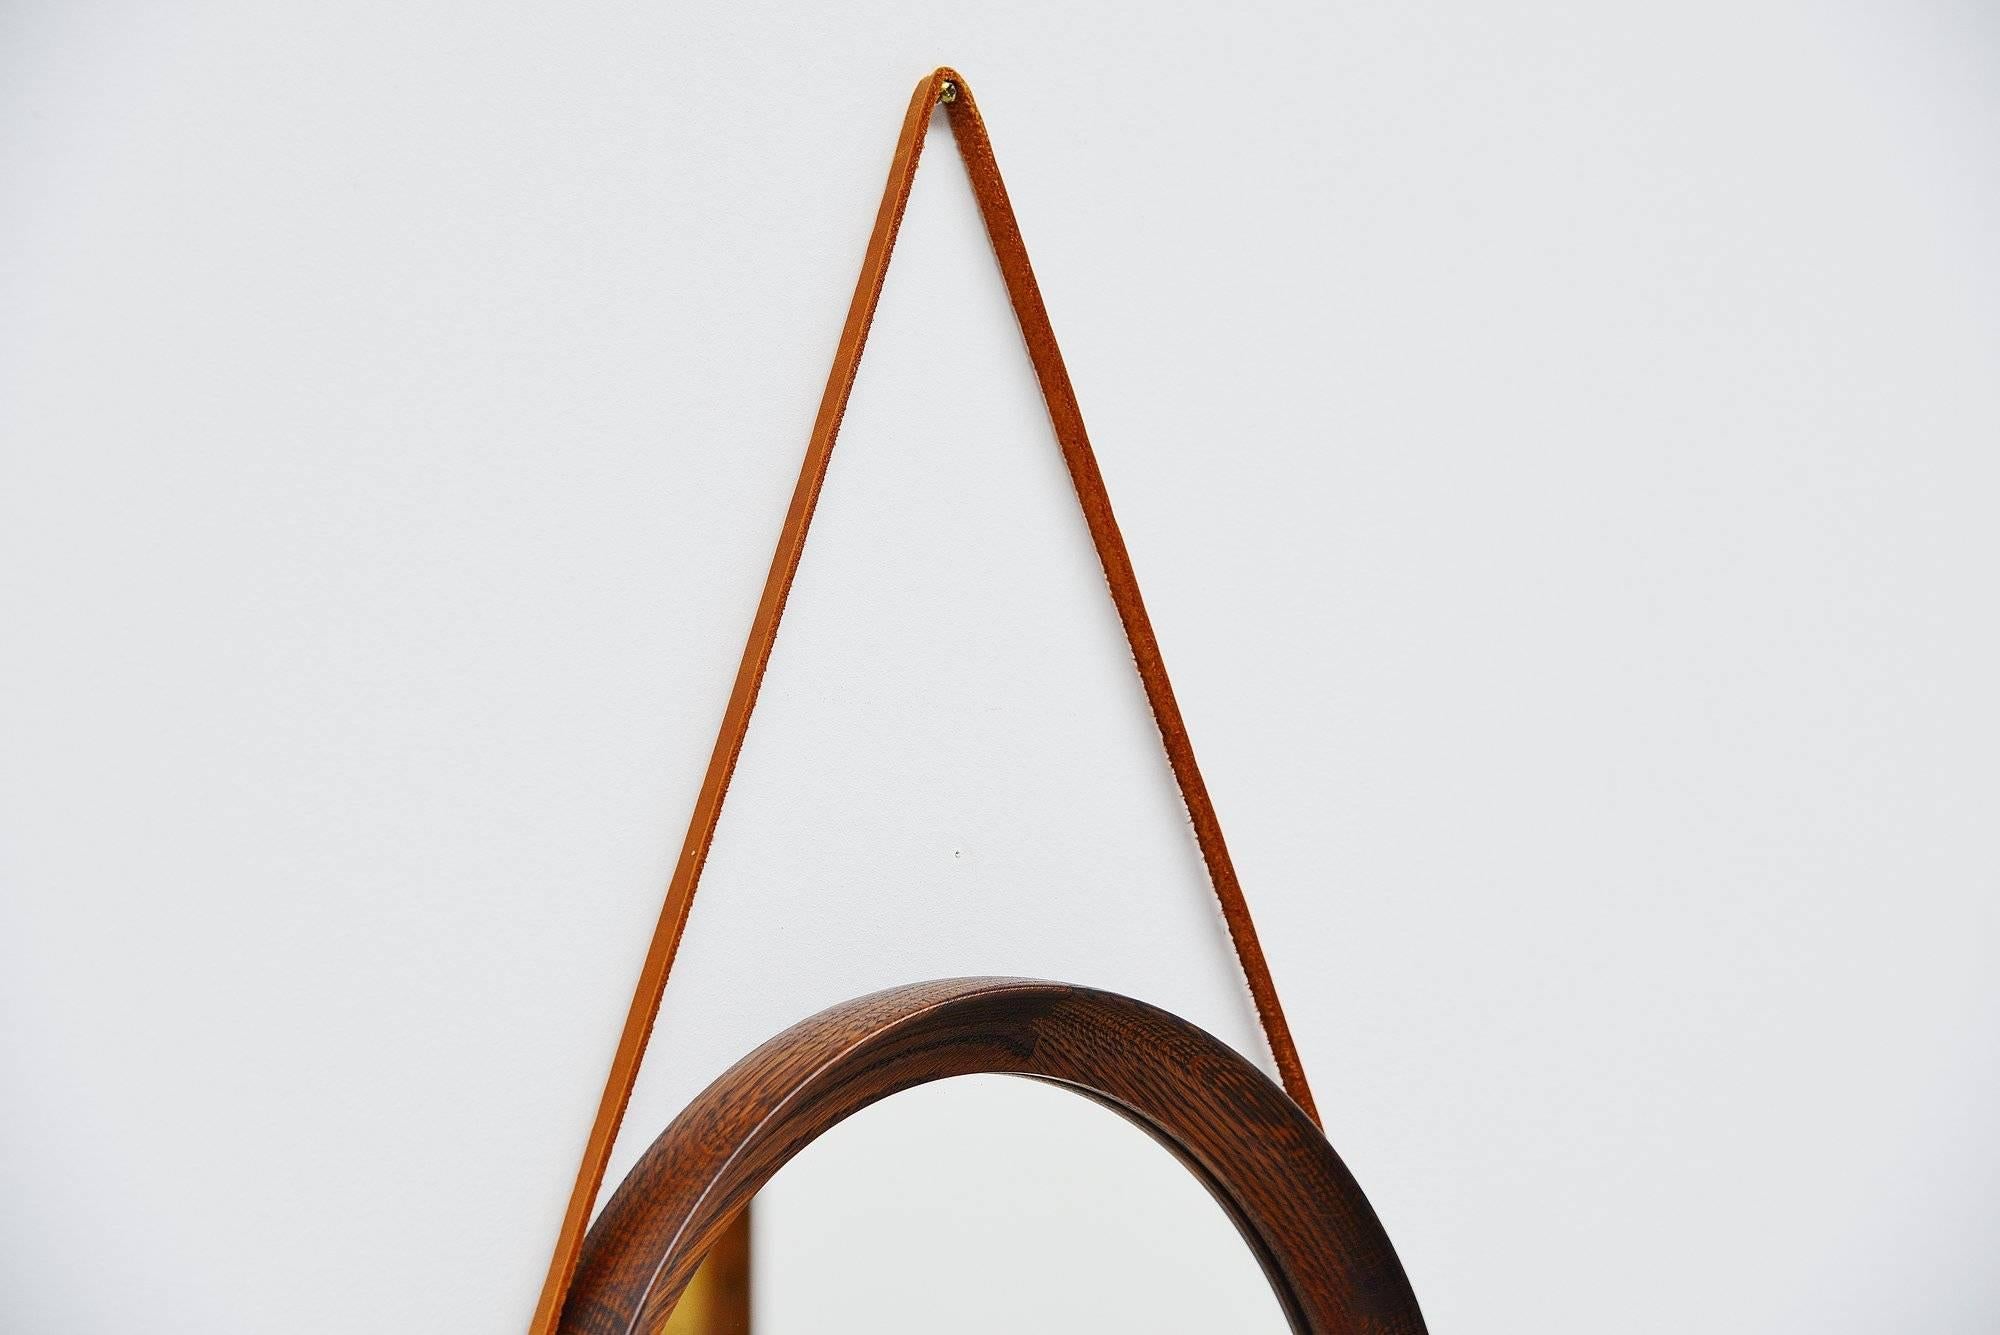 Very nicely made and crafted wall mirror designed by Uno and Osten Kristiansson, manufactured by Luxus, Sweden, 1960. This mirror was made of solid stained oak wooden parts with nice dovetail connections and a natural leather strap. The mirror is